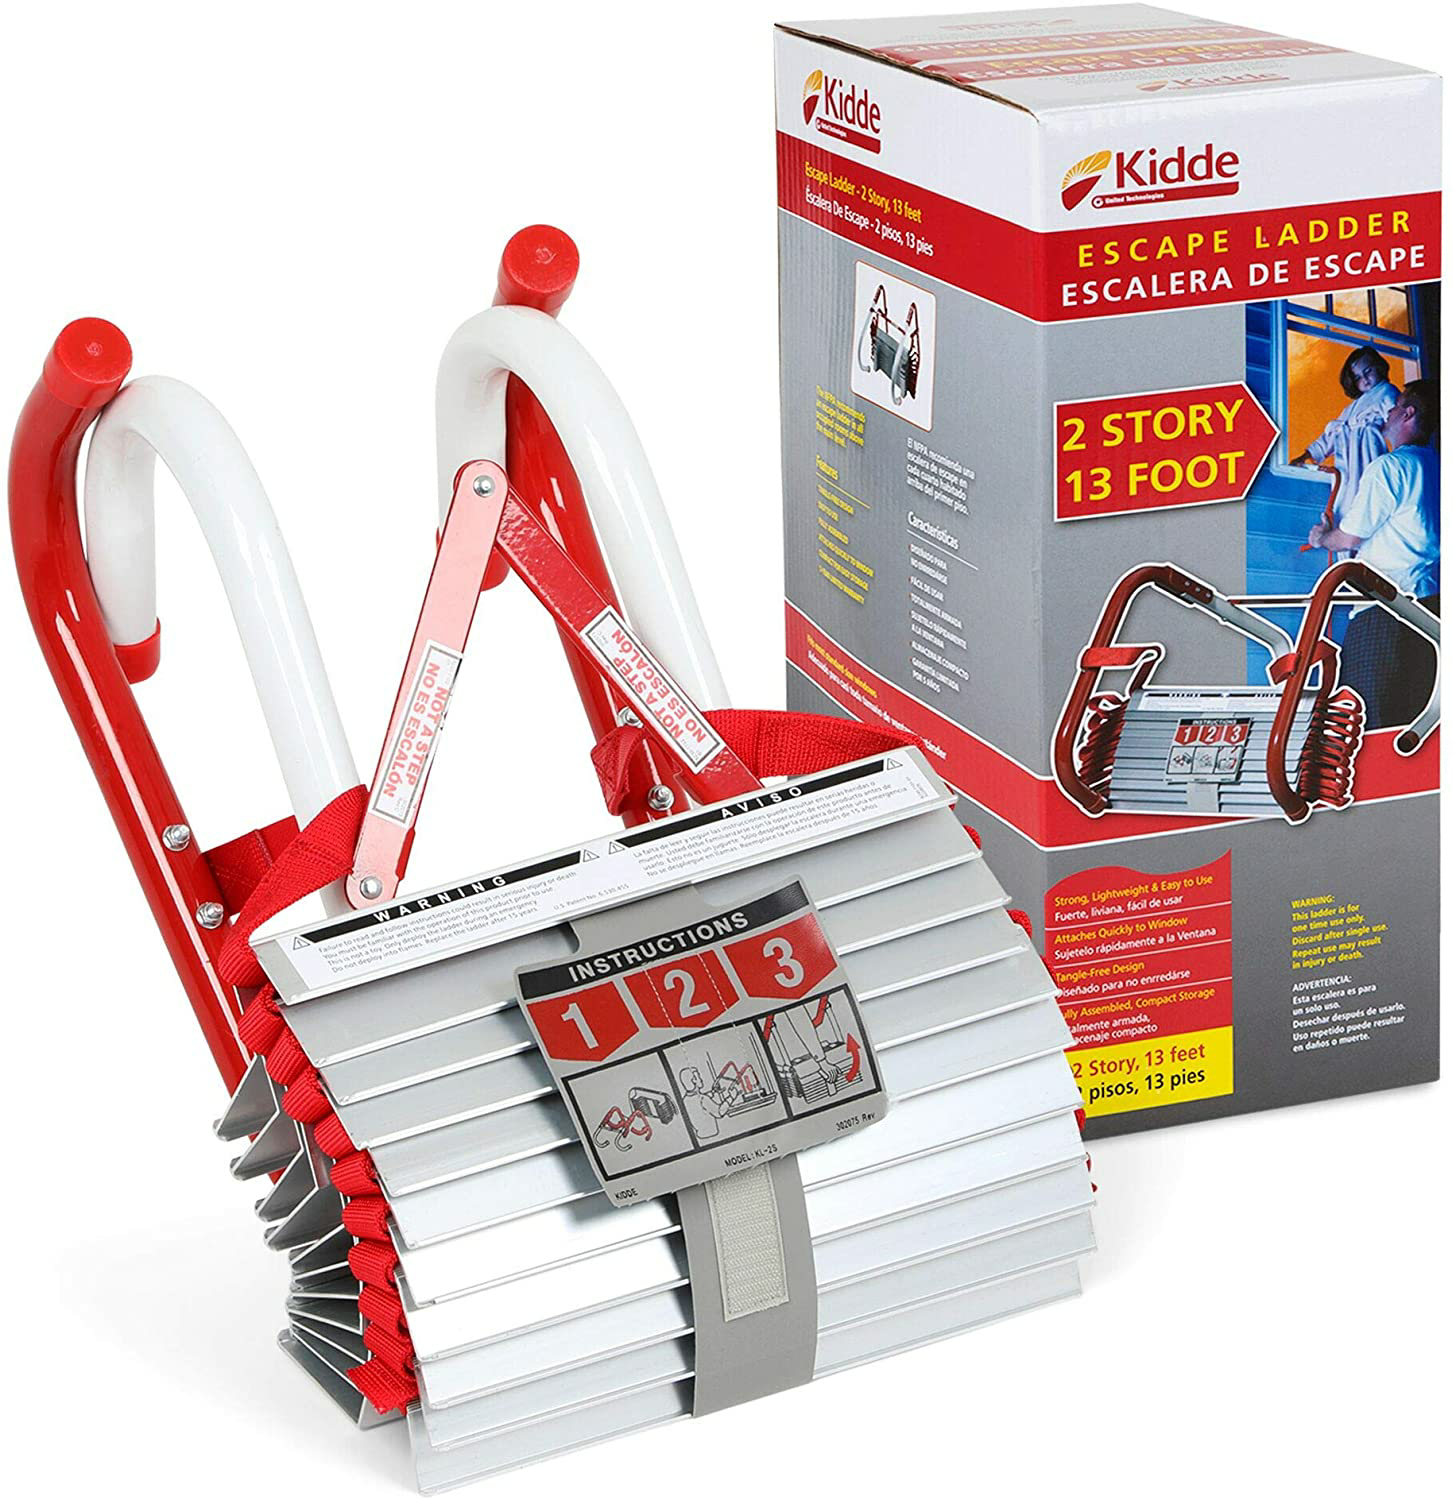 Kidde 468193 KL-2S, 2 Story Fire Escape Ladder with Anti-Slip Rungs, 13-Foot, Red - Emergency Ladders - Amazon.com $28.79